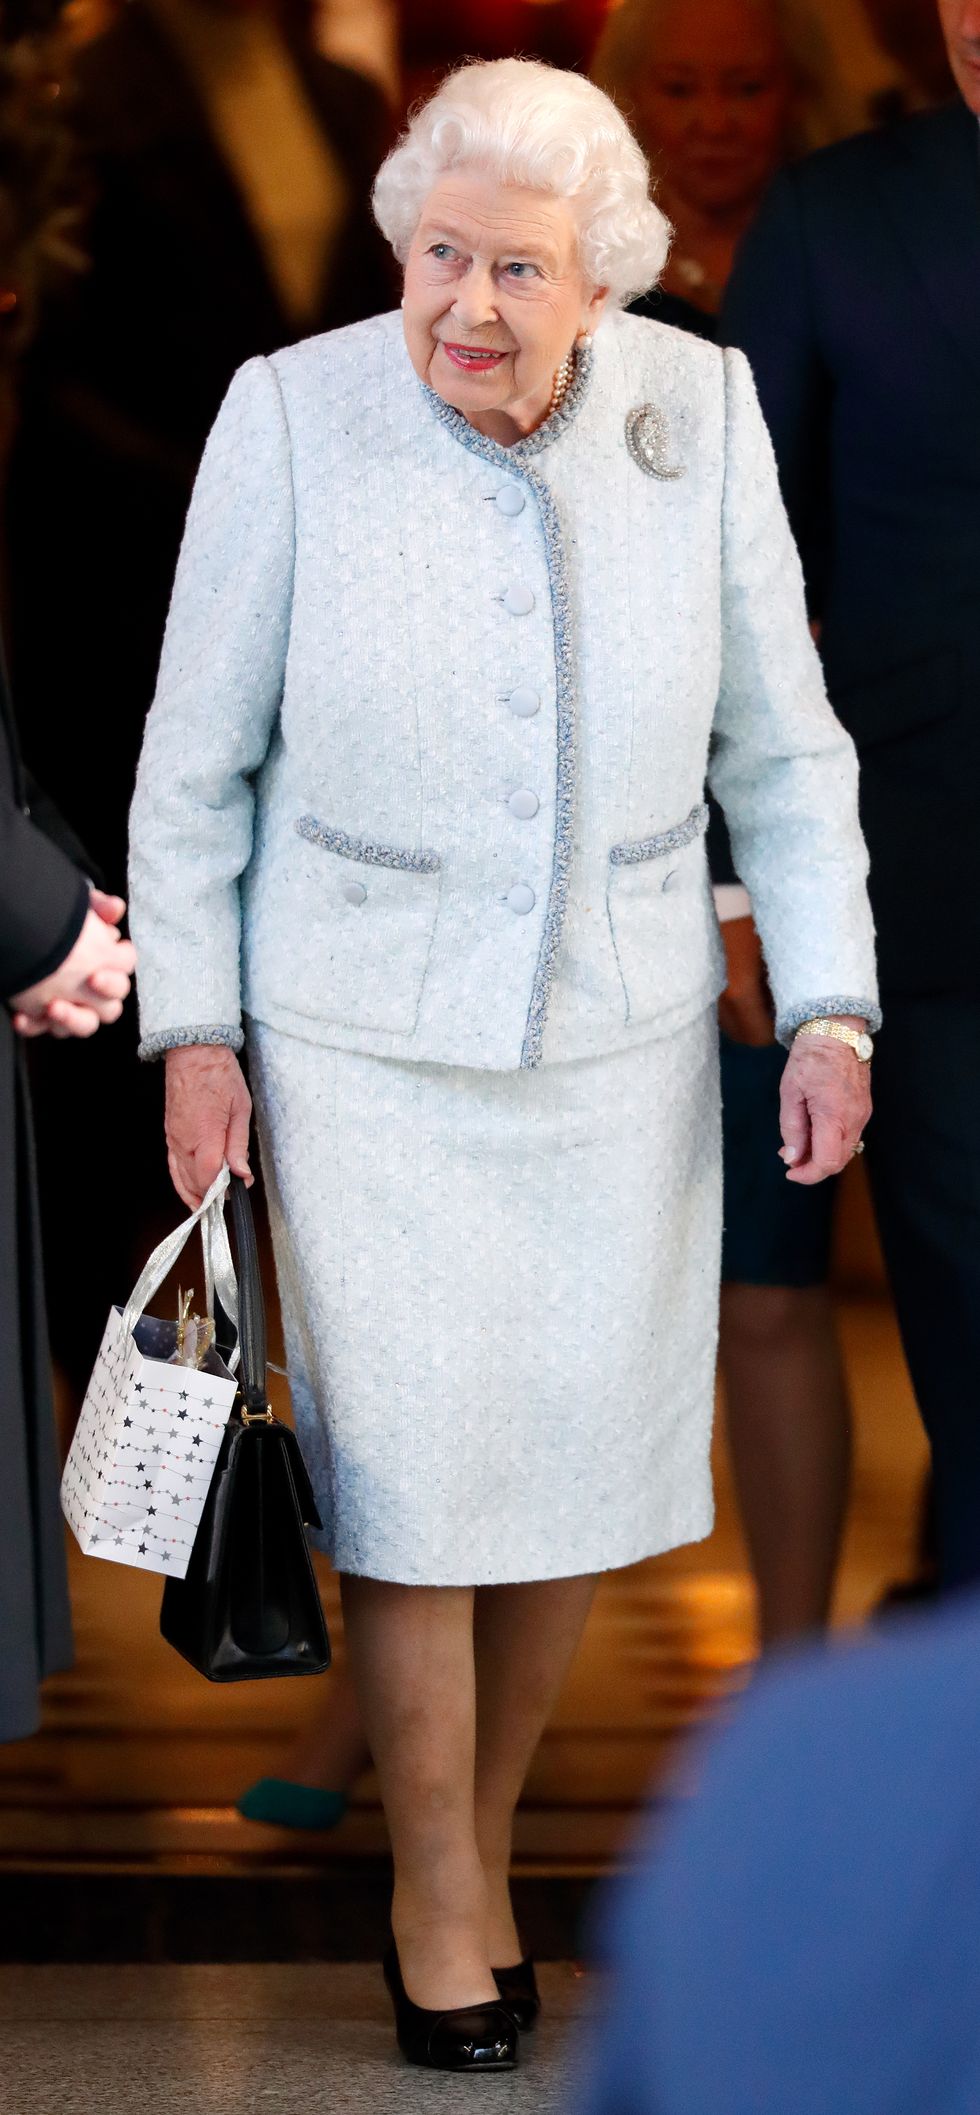 Queen Elizabeth II Hosts A Christmas Lunch At The Goring Hotel